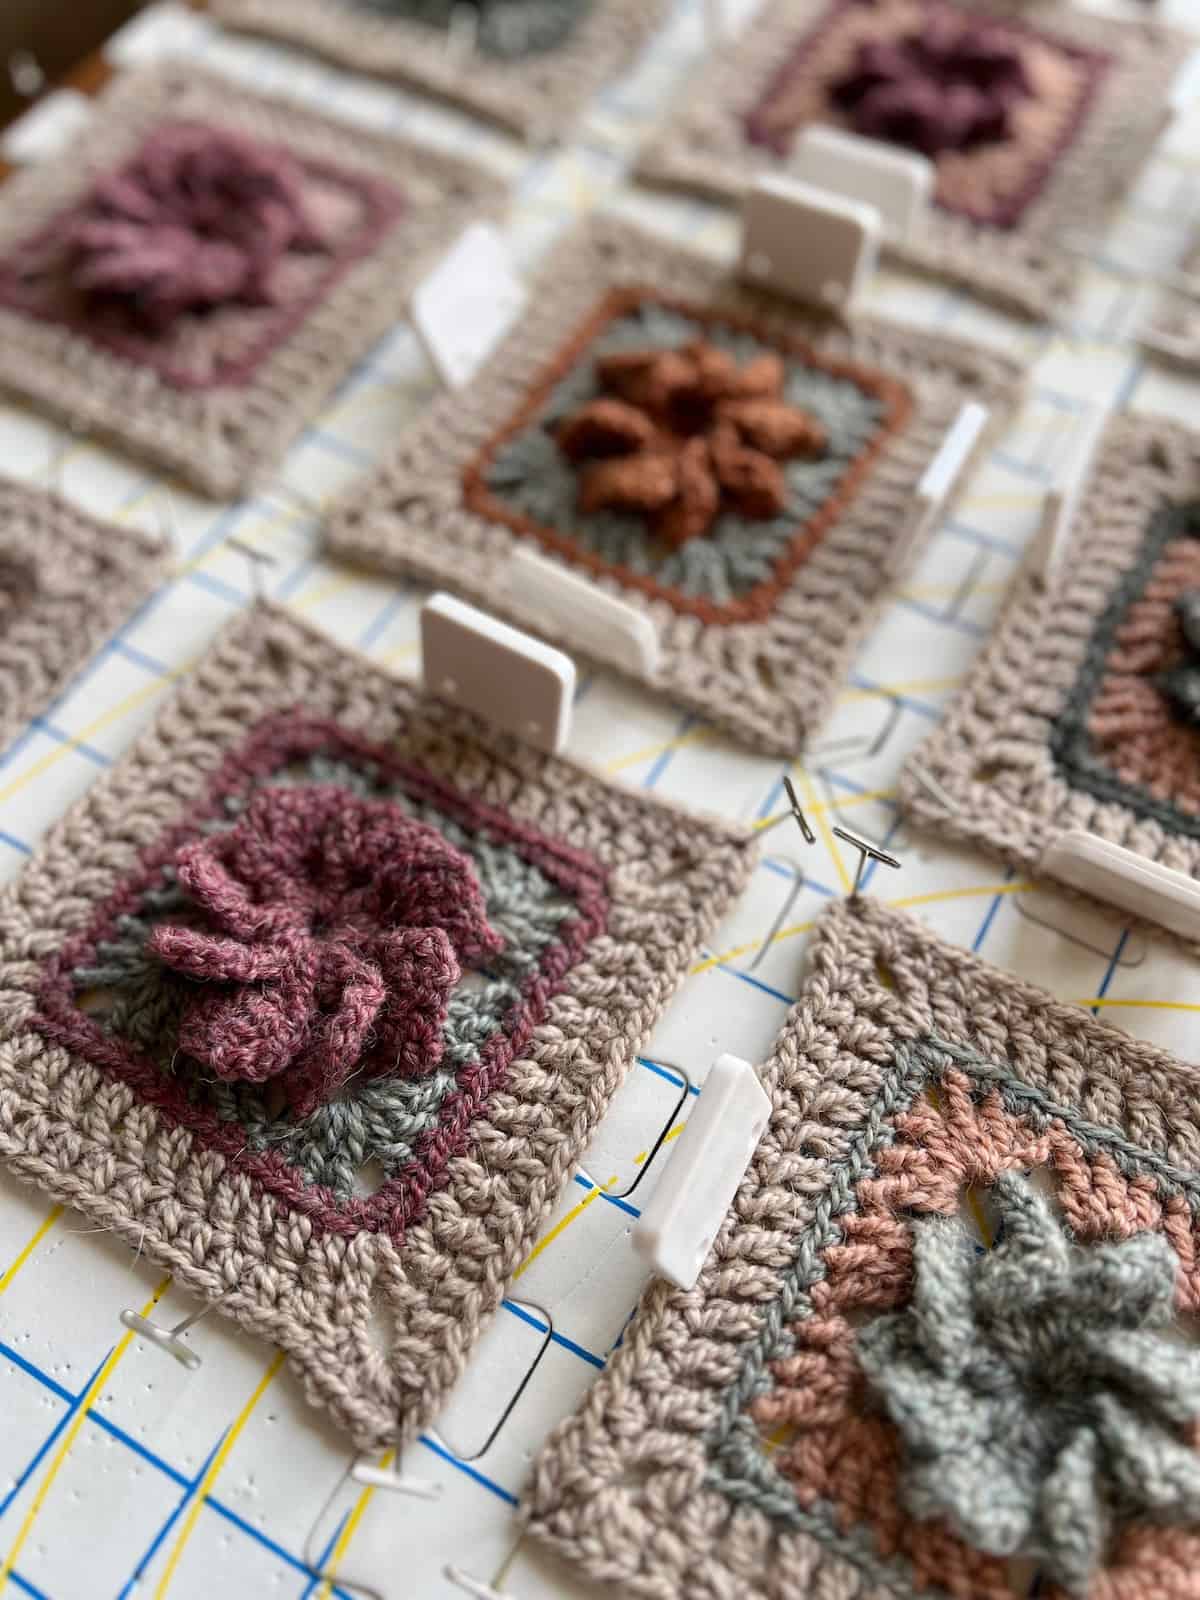 A group of crocheted squares on a table.